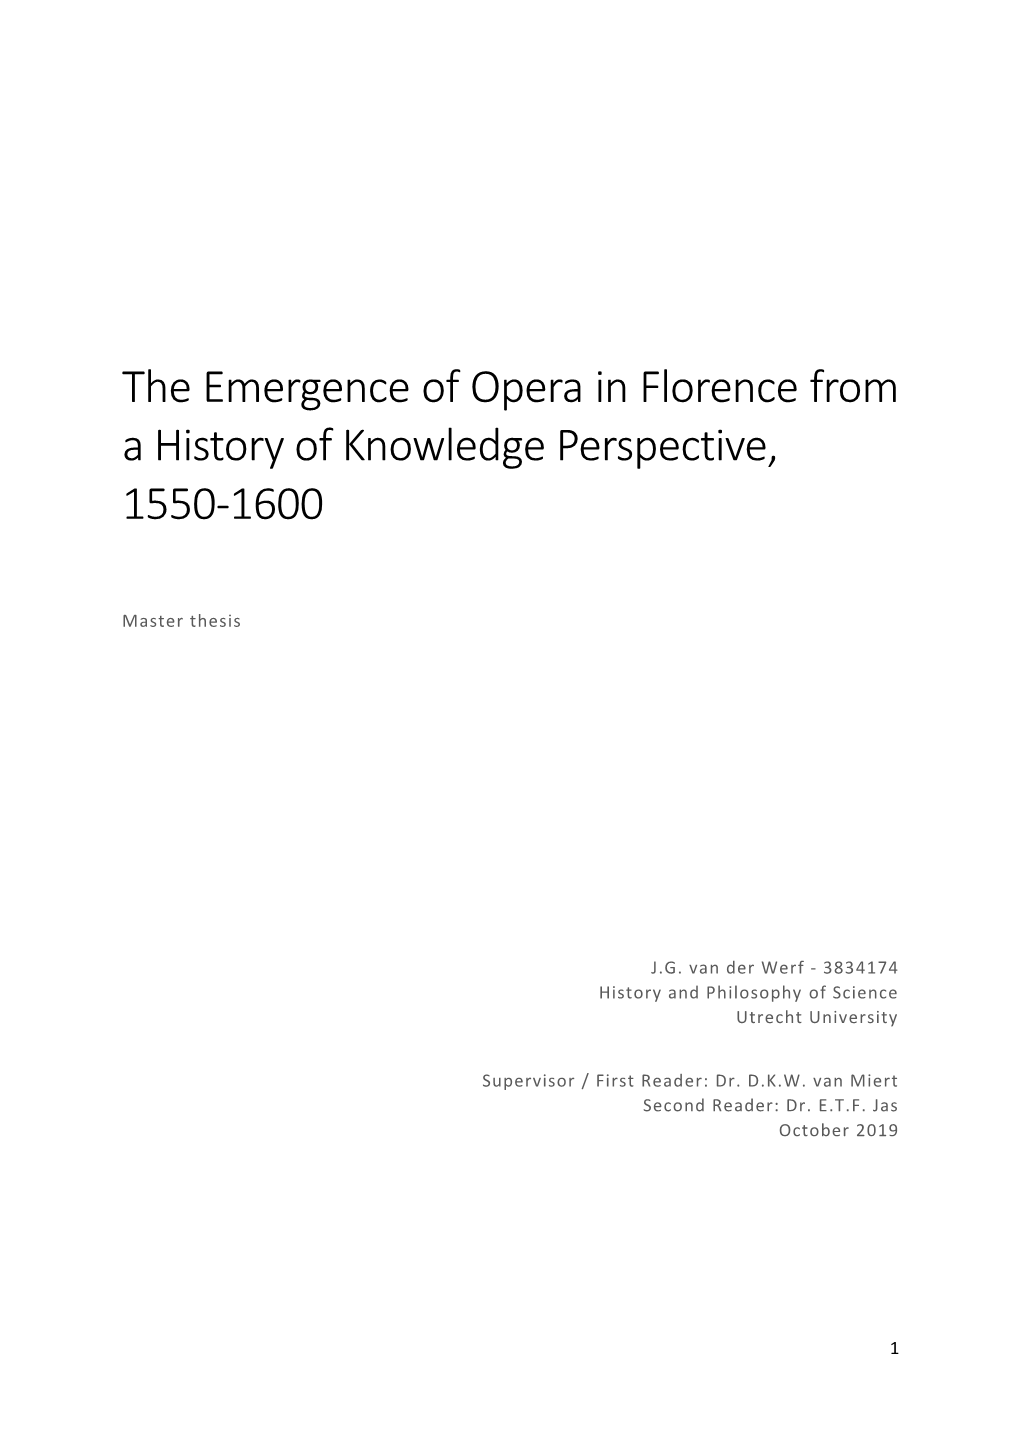 The Emergence of Opera in Florence from a History of Knowledge Perspective, 1550-1600